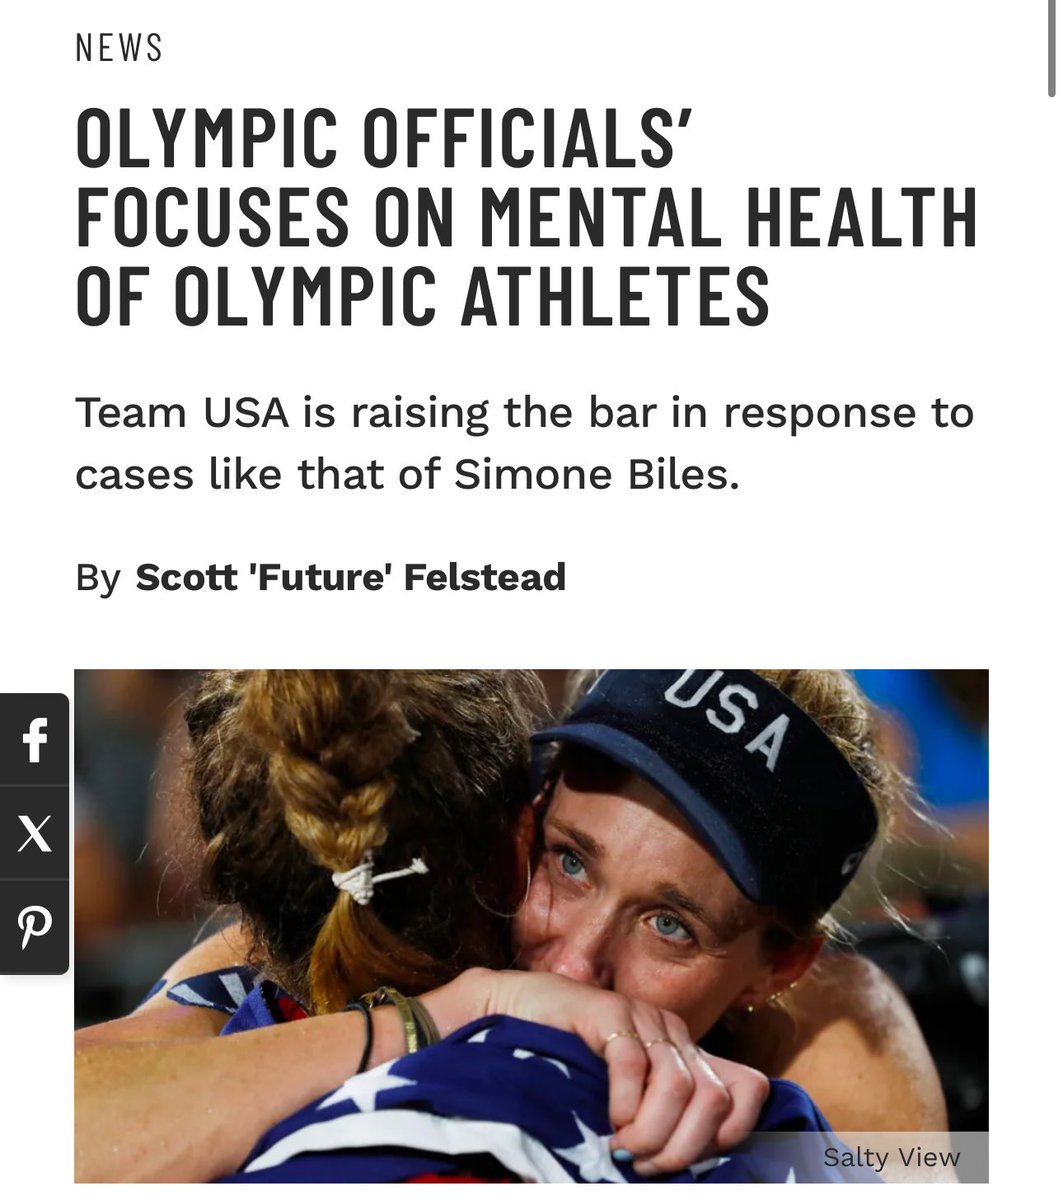 OLYMPIC OFFICIALS’ FOCUSES ON MENTAL HEALTH OF OLYMPIC ATHLETES

Team USA is raising the bar in response to cases like that of Simone Biles.
By Scott 'Future' Felstead

Read Article: muscleandfitness.com 

#AthleteNews #FitnessNews #MediaNews #MentalHealth #OlympicAthlete